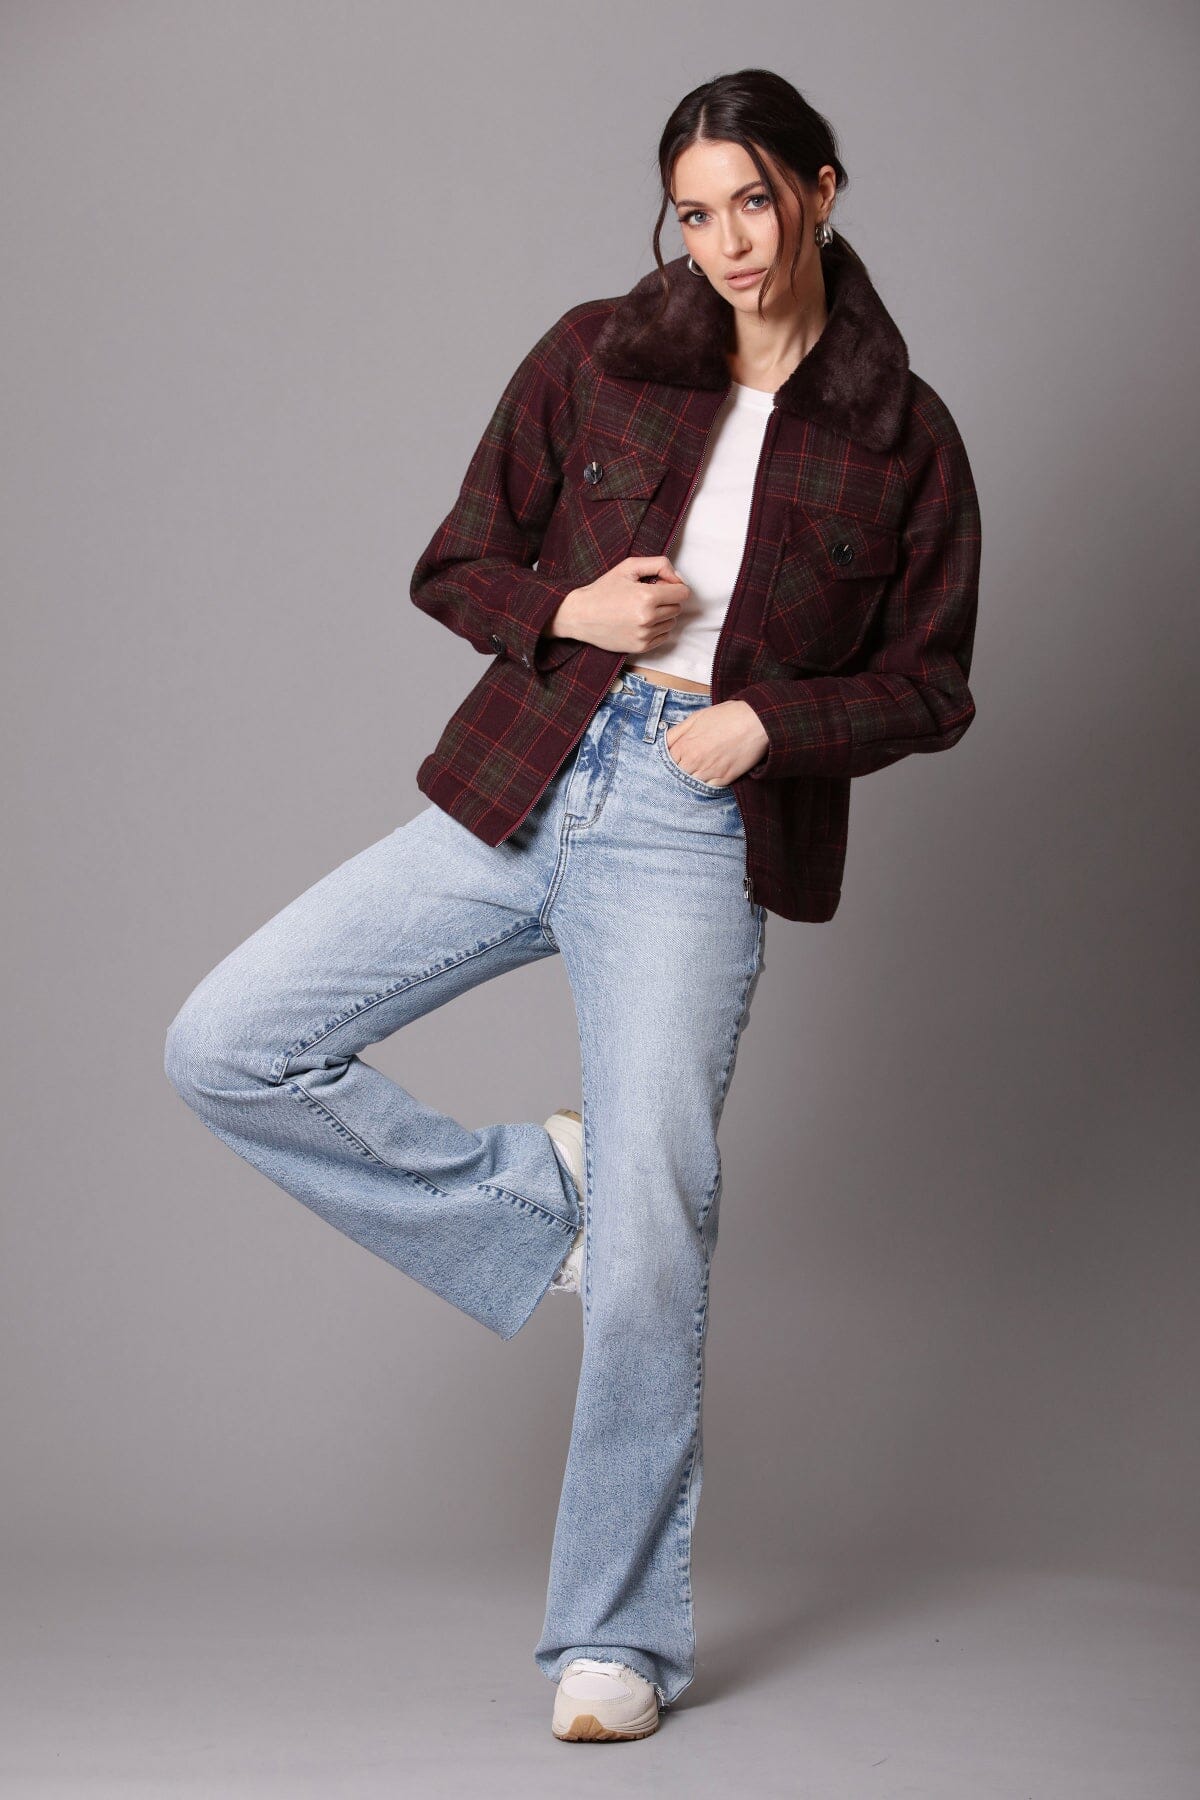 Maroon plaid zip-front faux fur collared jacket coat - women's figure flattering day to night coats jackets